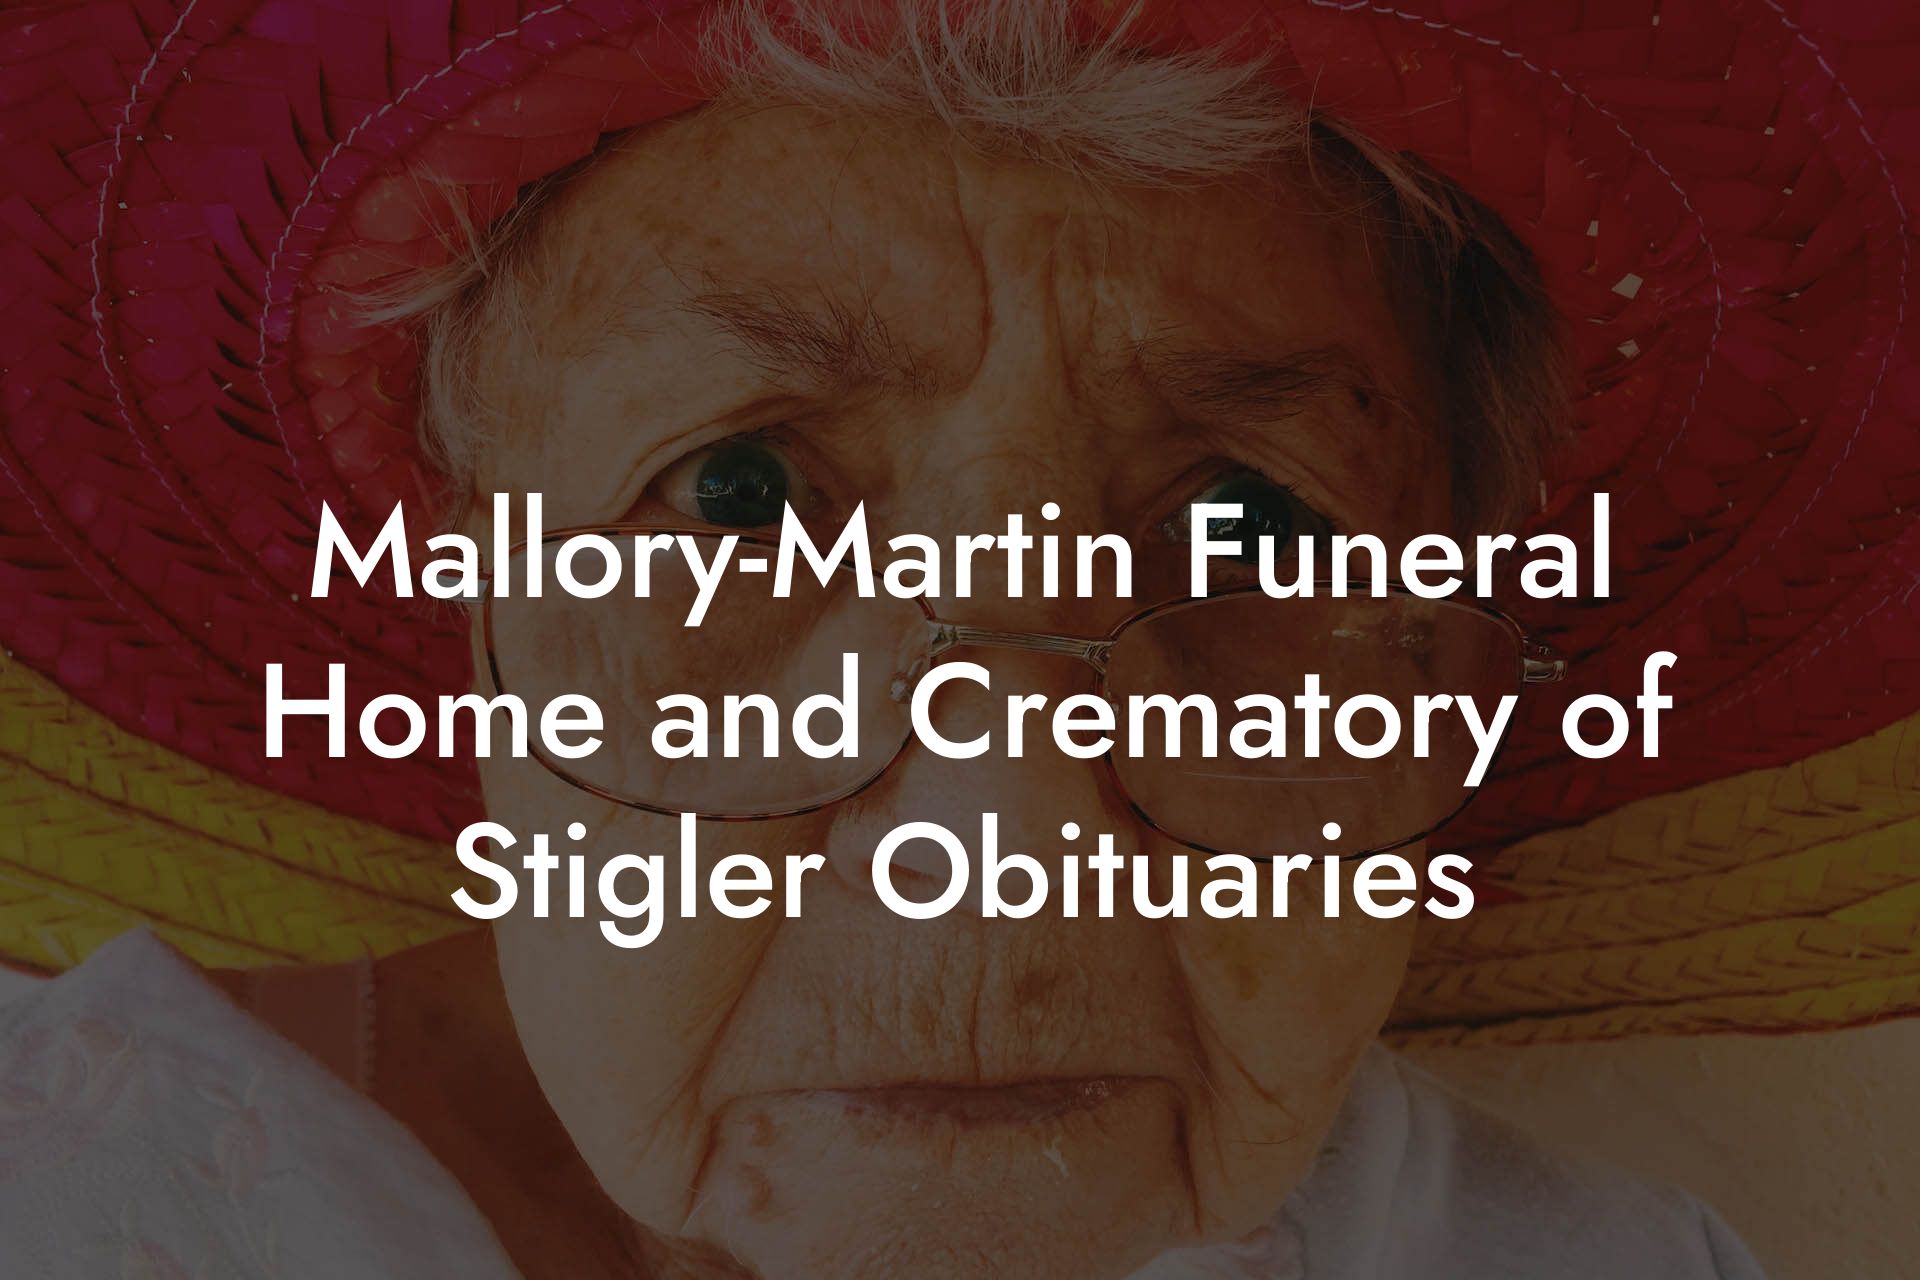 Mallory-Martin Funeral Home and Crematory of Stigler Obituaries